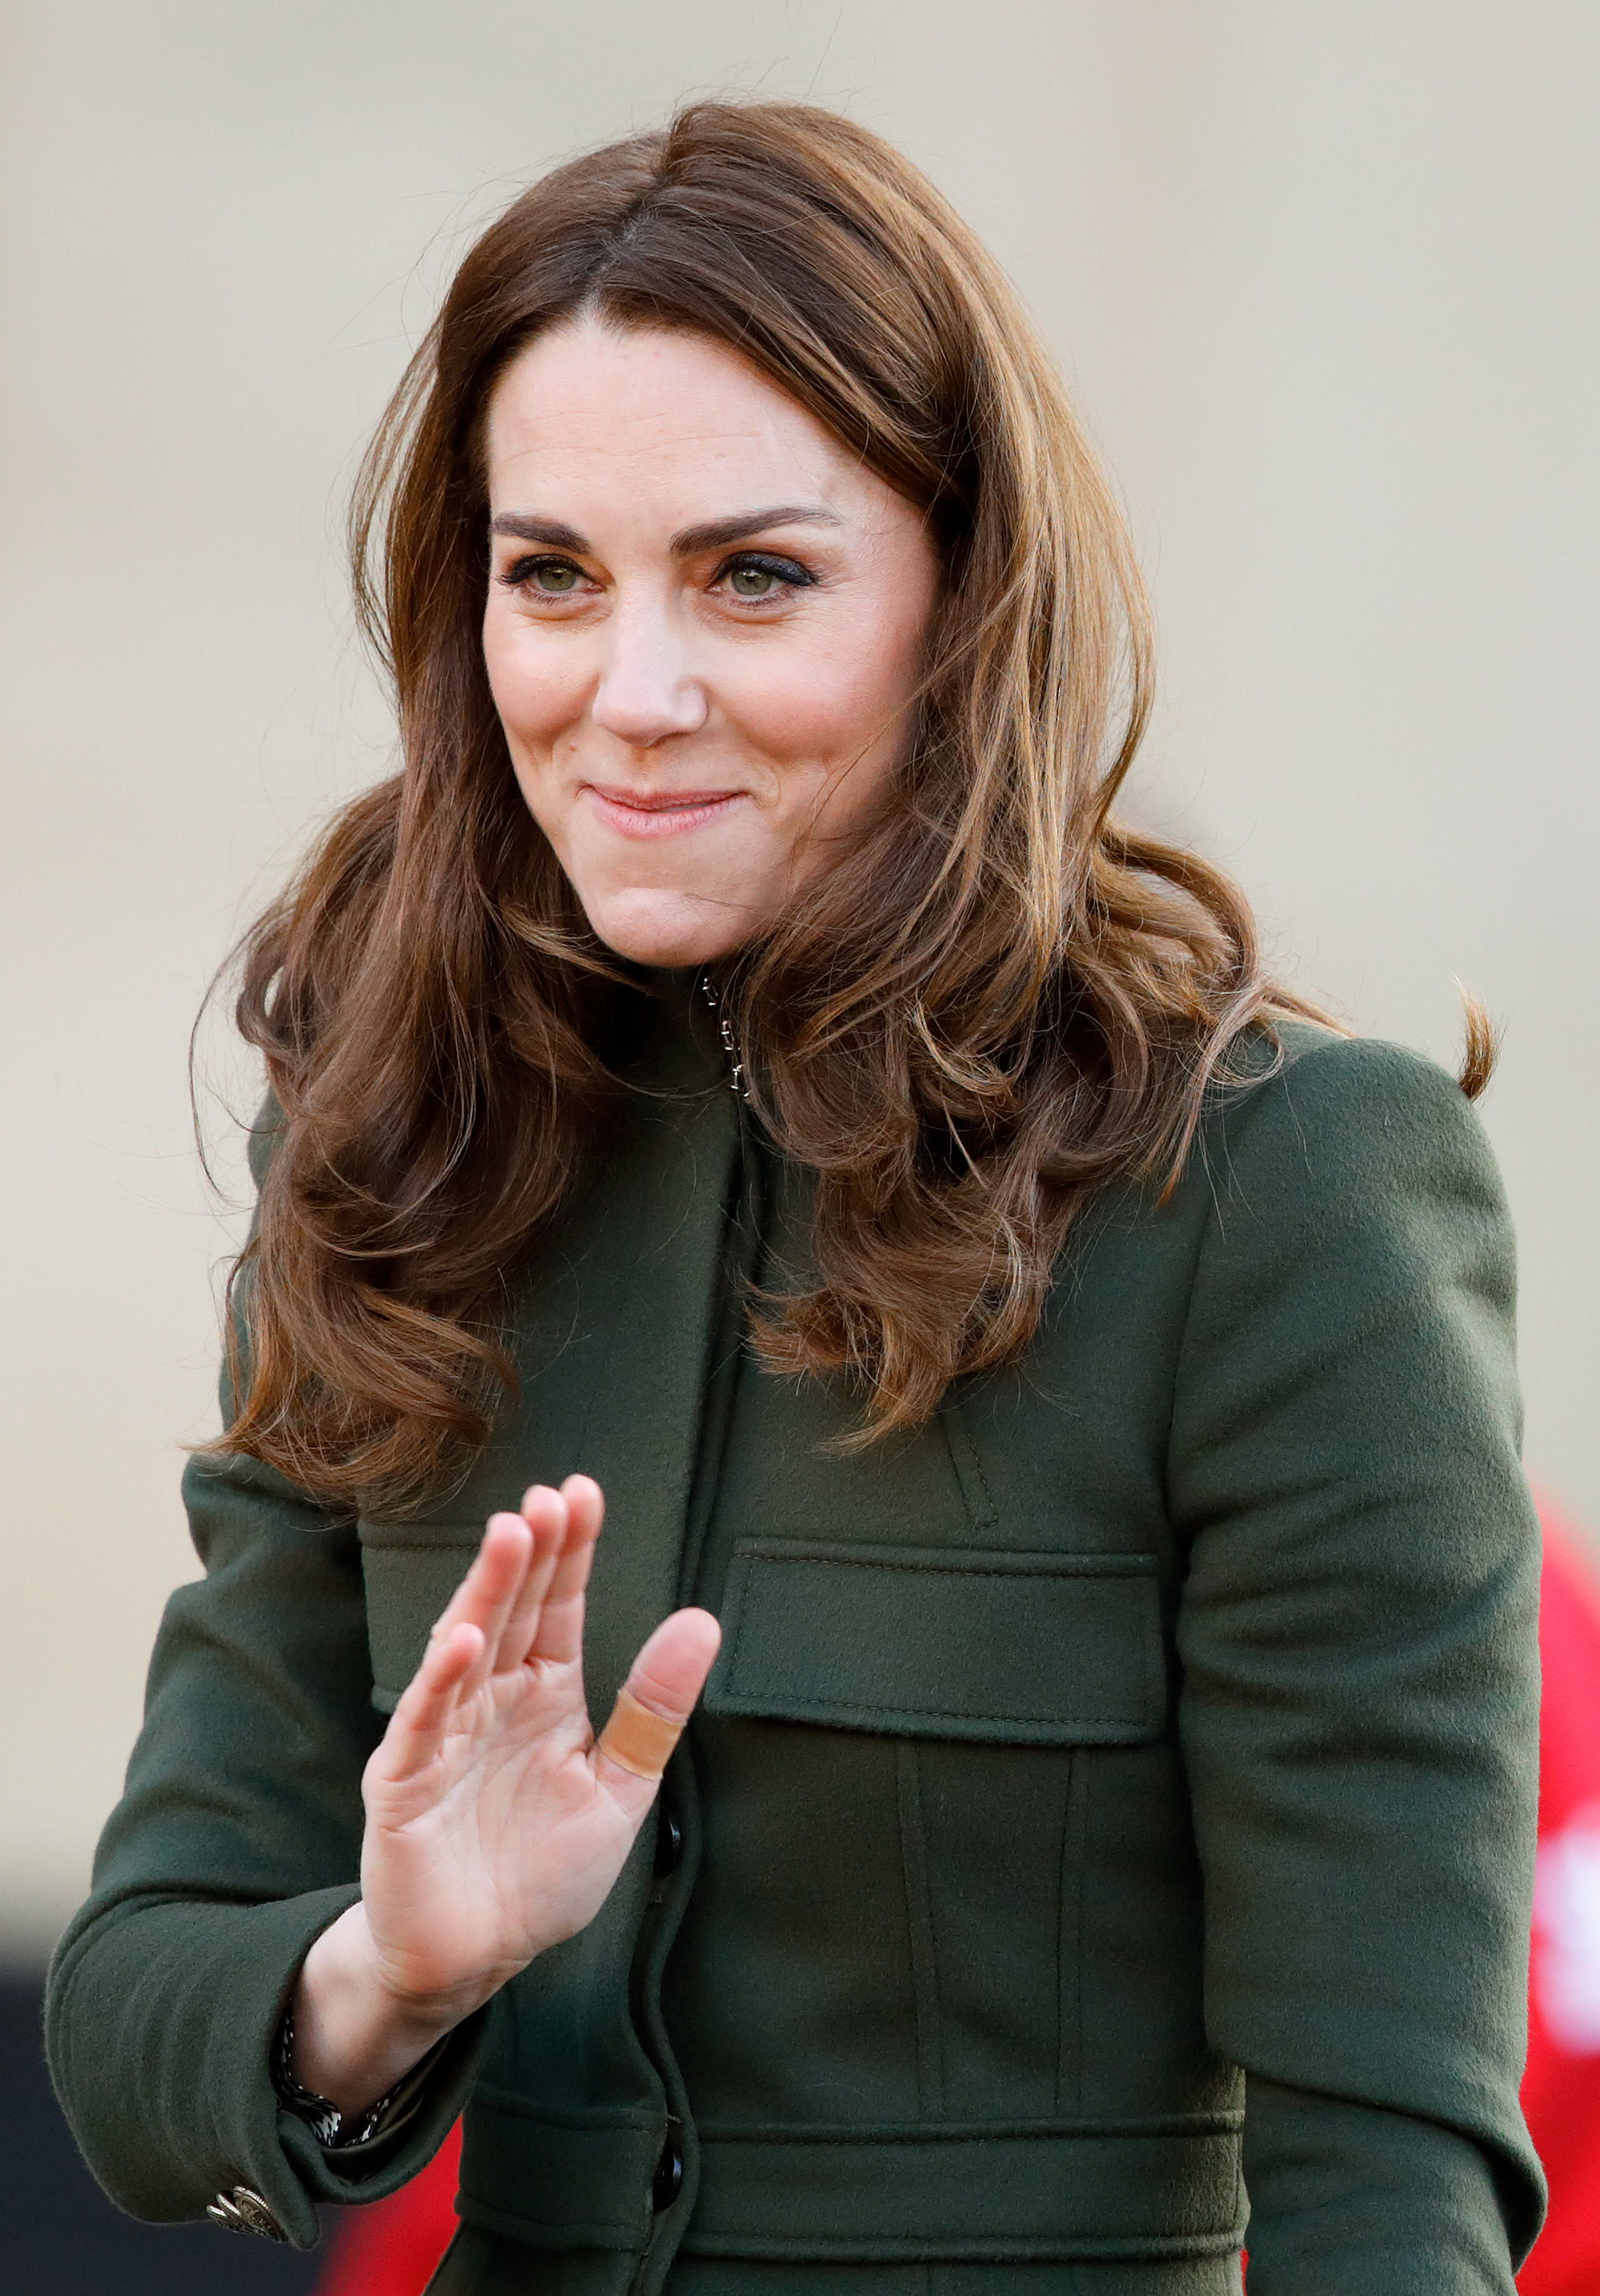 Princess Catherine visiting Bradford's Centenary Square in Bradford, England on January 15, 2020 | Source: Getty Images